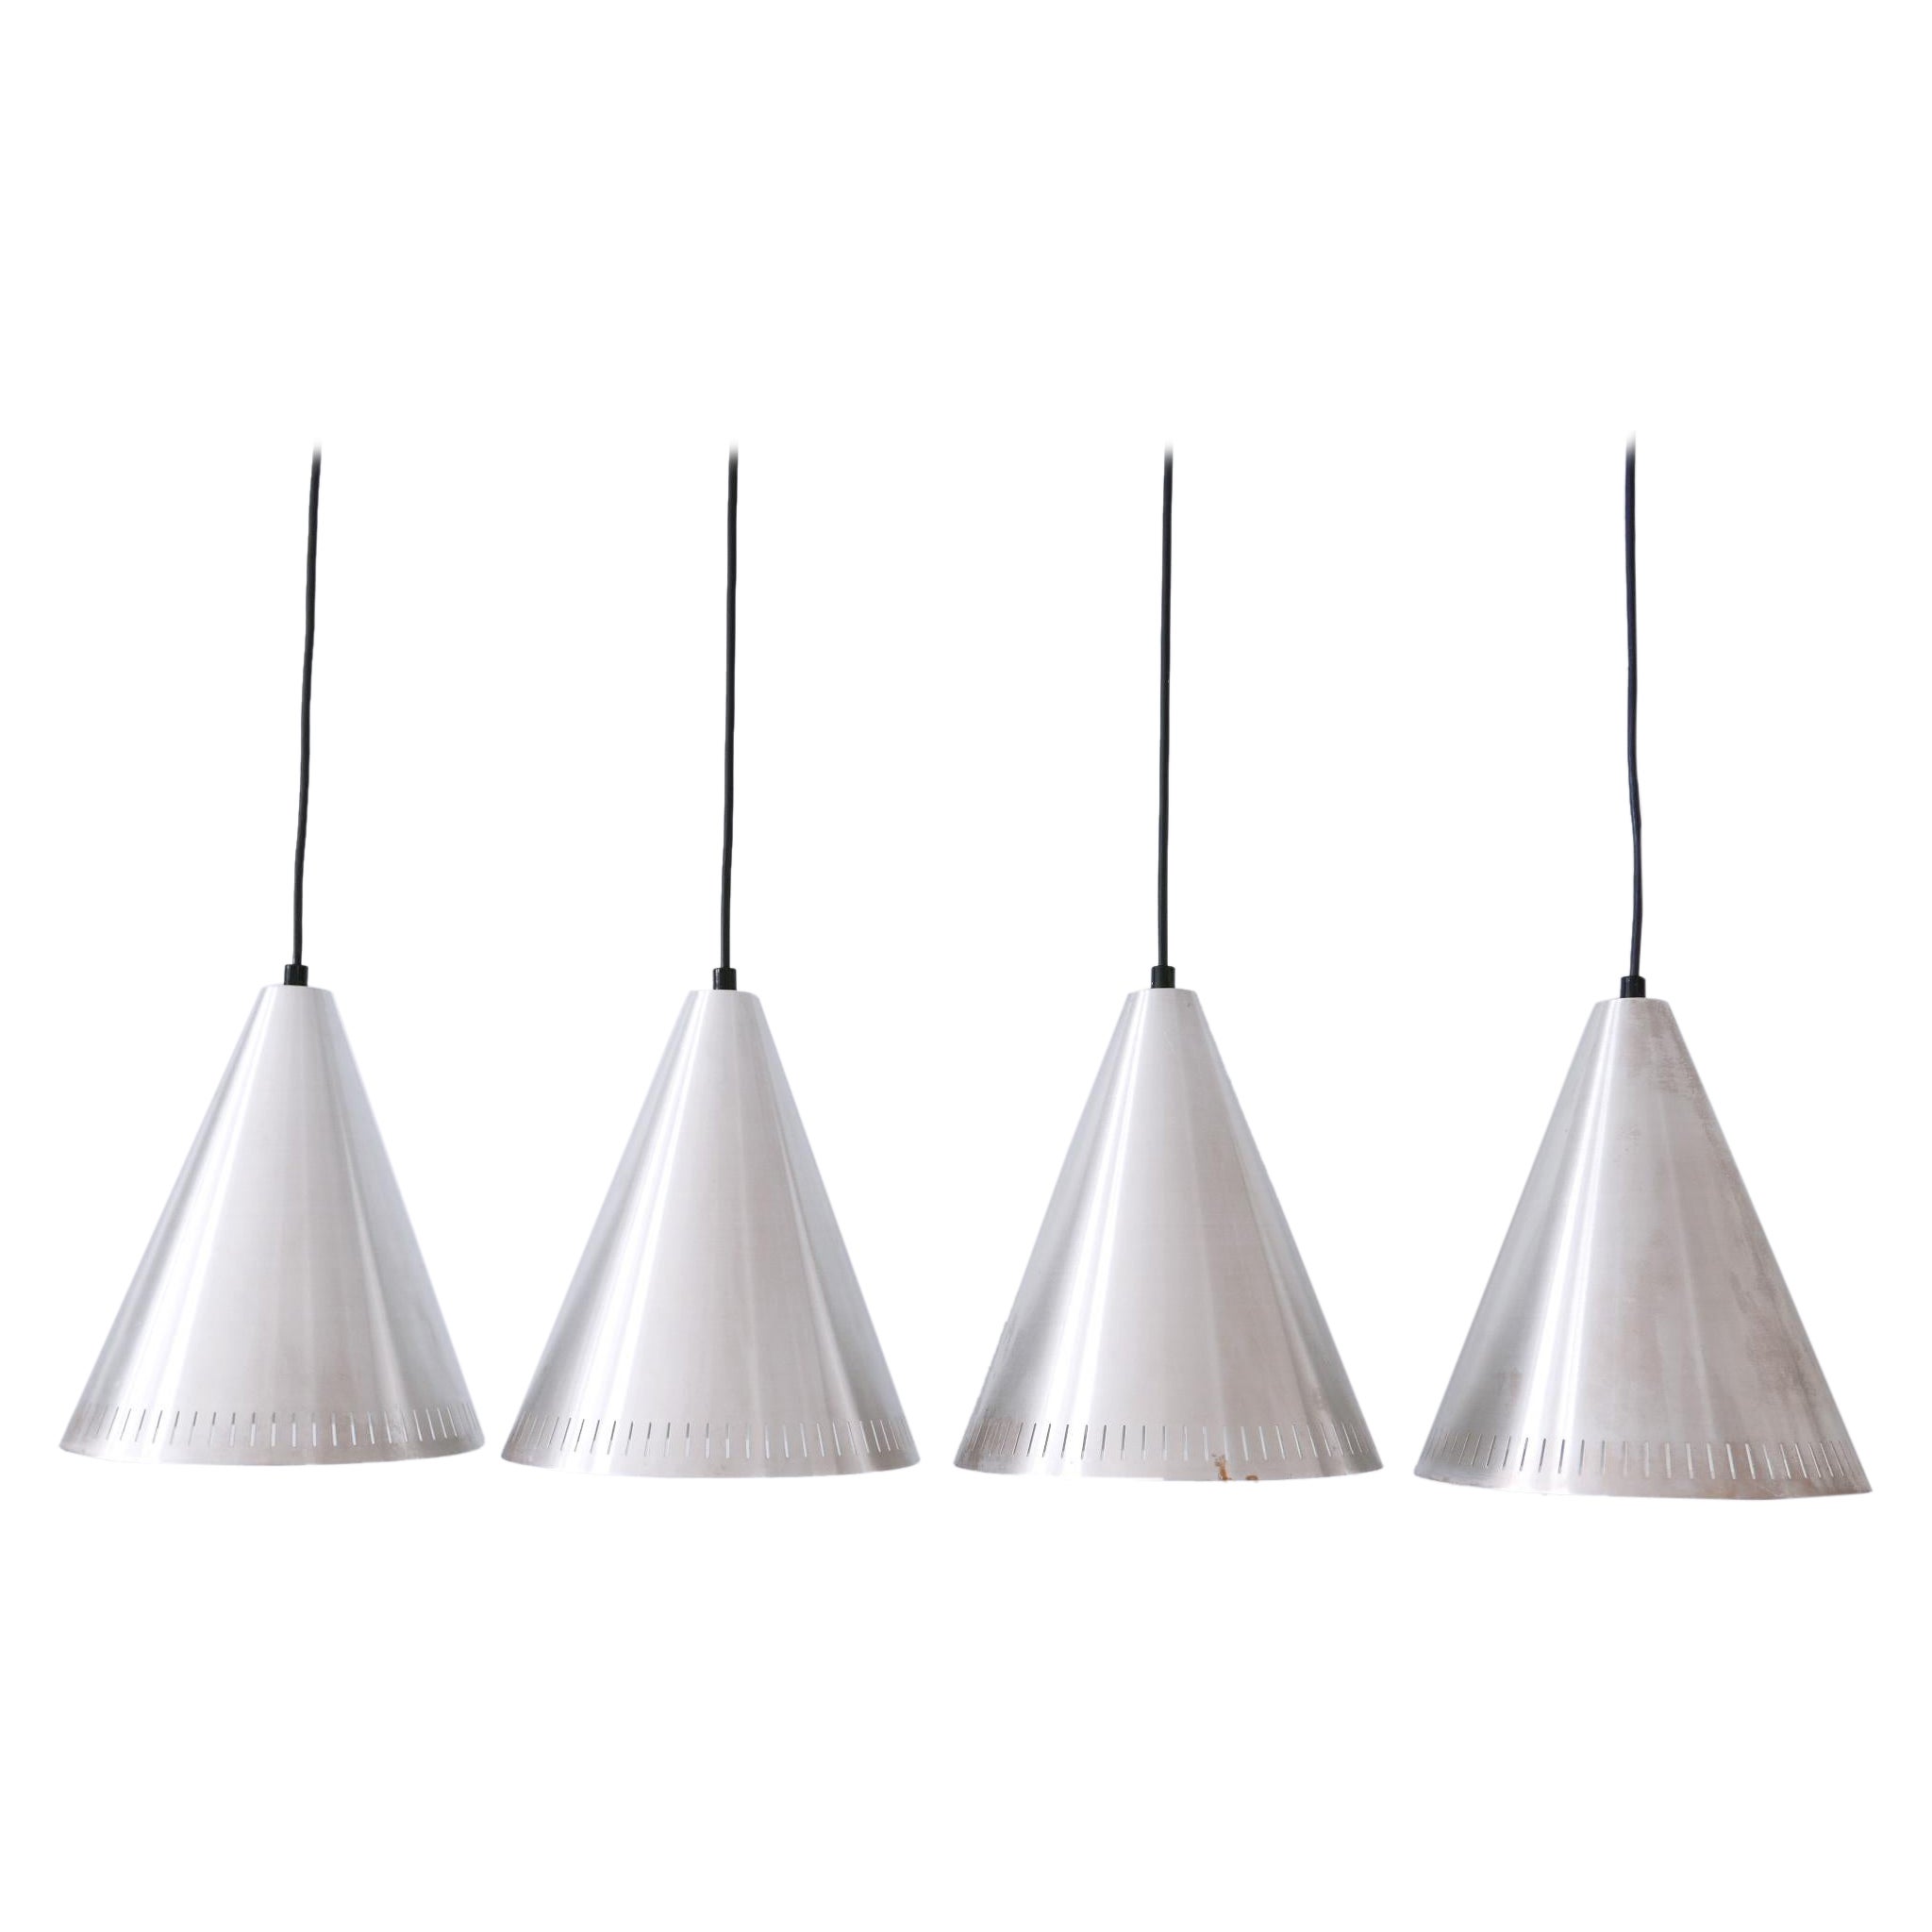 Set of Four Mid Century Modern Aluminium Pendant Lamps by Goldkant 1970s Germany For Sale